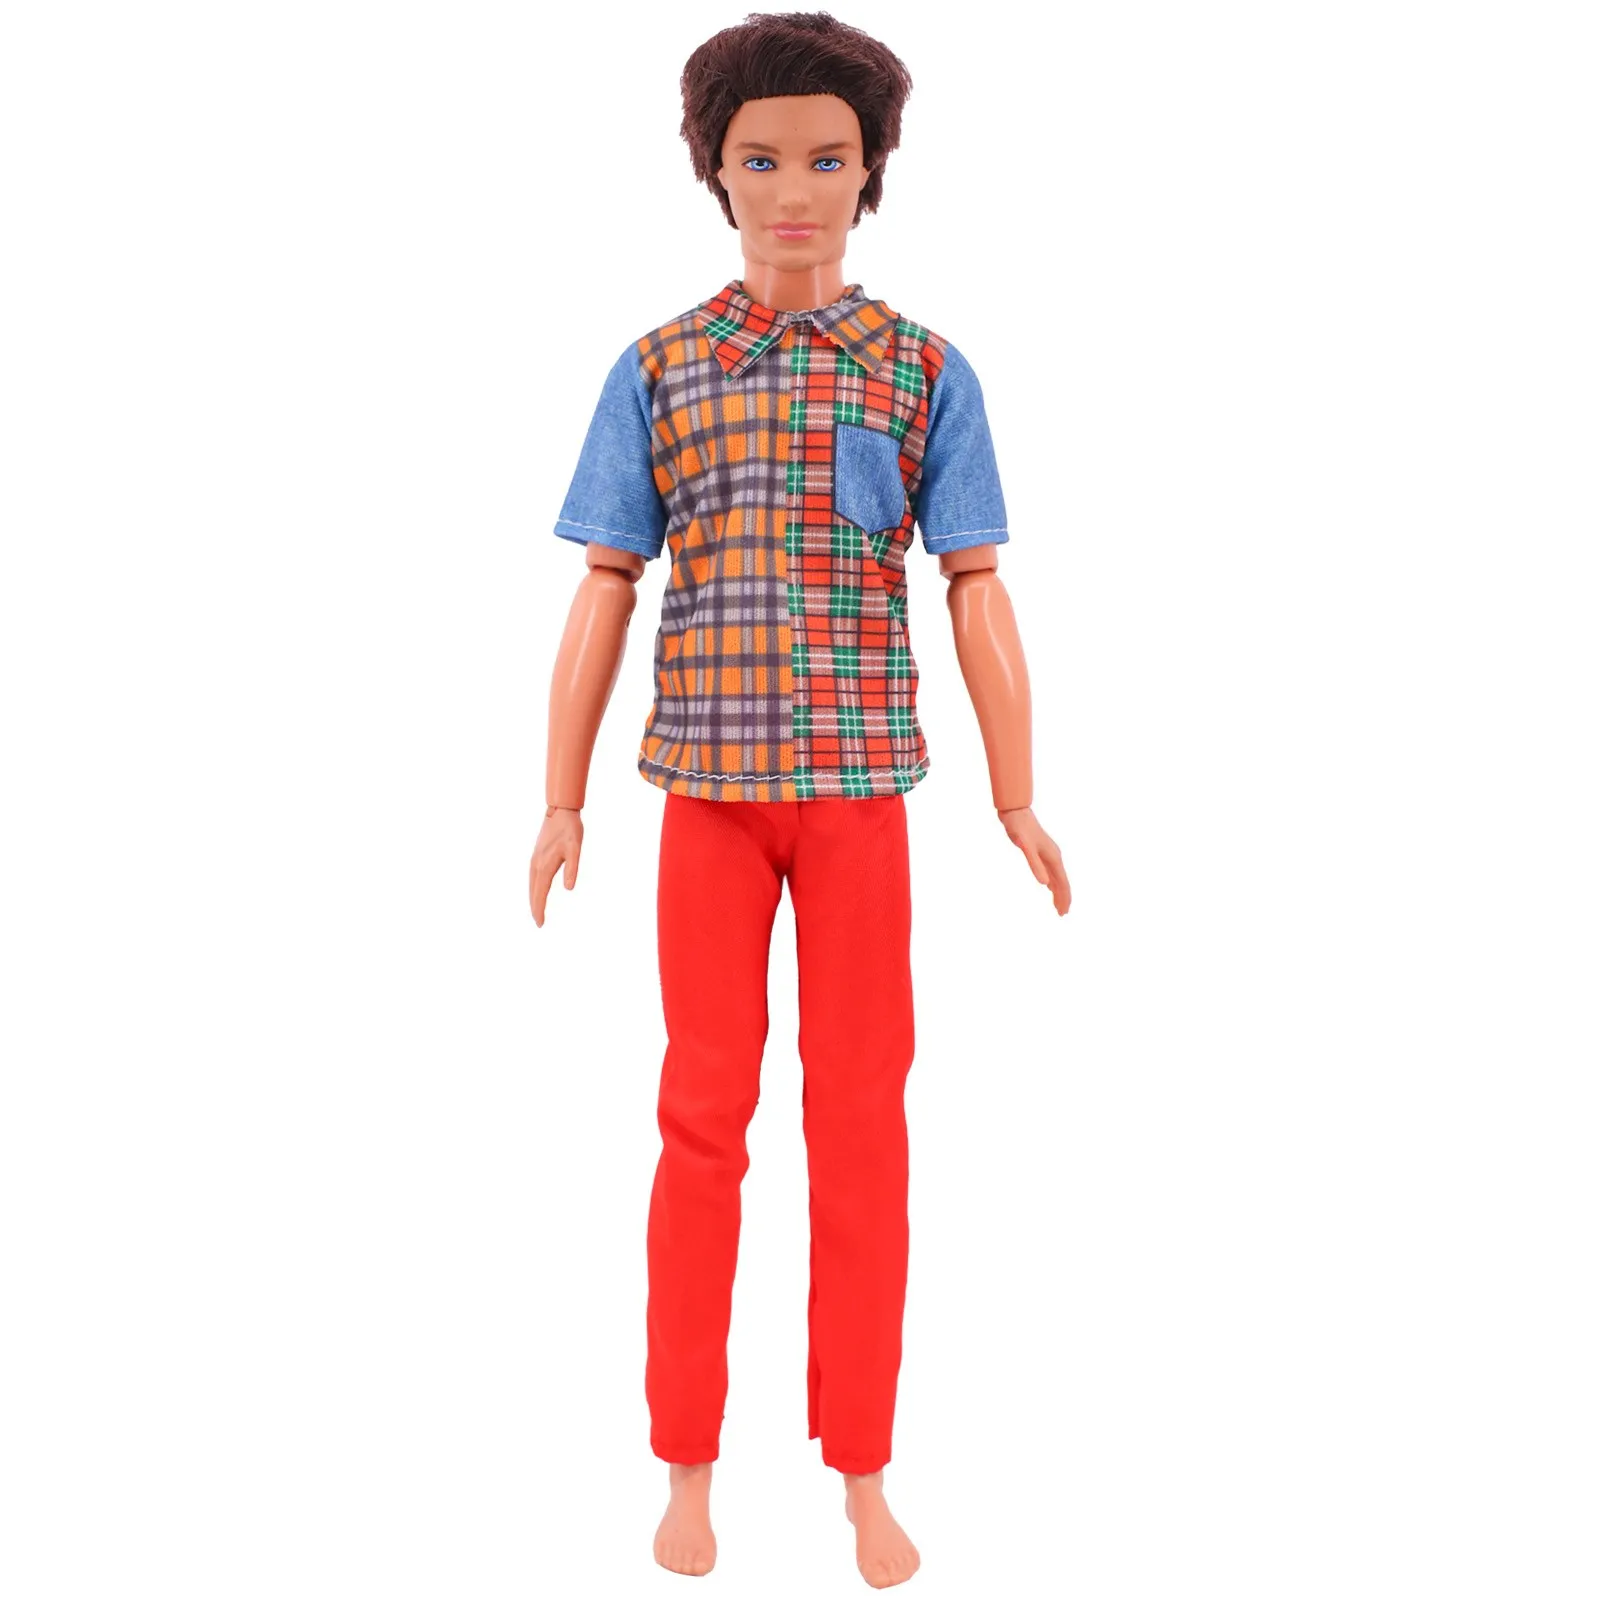 Ken Doll Clothes Doll Daily Wear Casual Suit Shirt+Pants Wedding Party Suit  Man Male Doll Clothes For 30cm Ken Doll Accessories - AliExpress